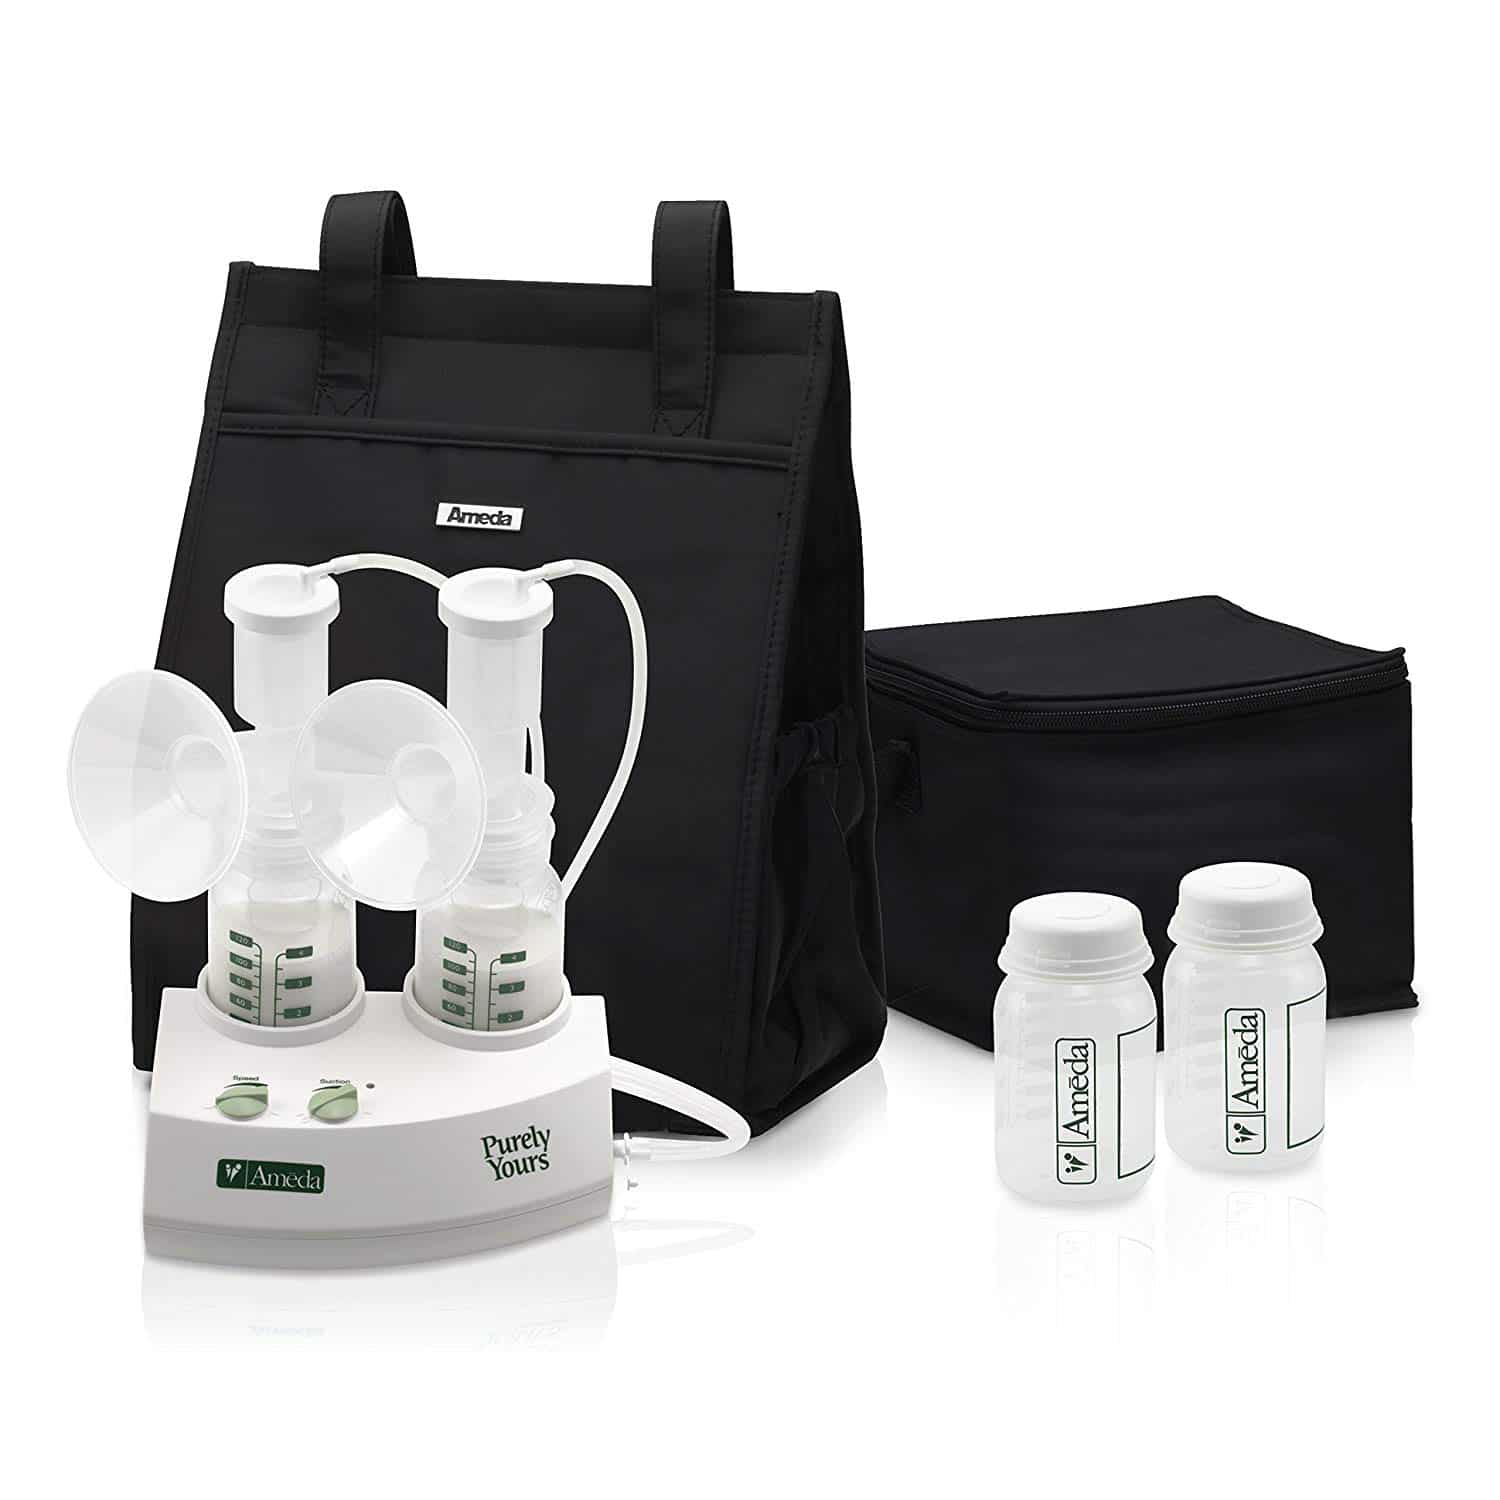 Ameda Purely Yours Double Electric Breast Pump White Includes Breast Pump Dual HygieniKit System Shoulder Bag Cool N Carry Milk Tote AC Power Adapter Milk Storage Bottles Ice Packs